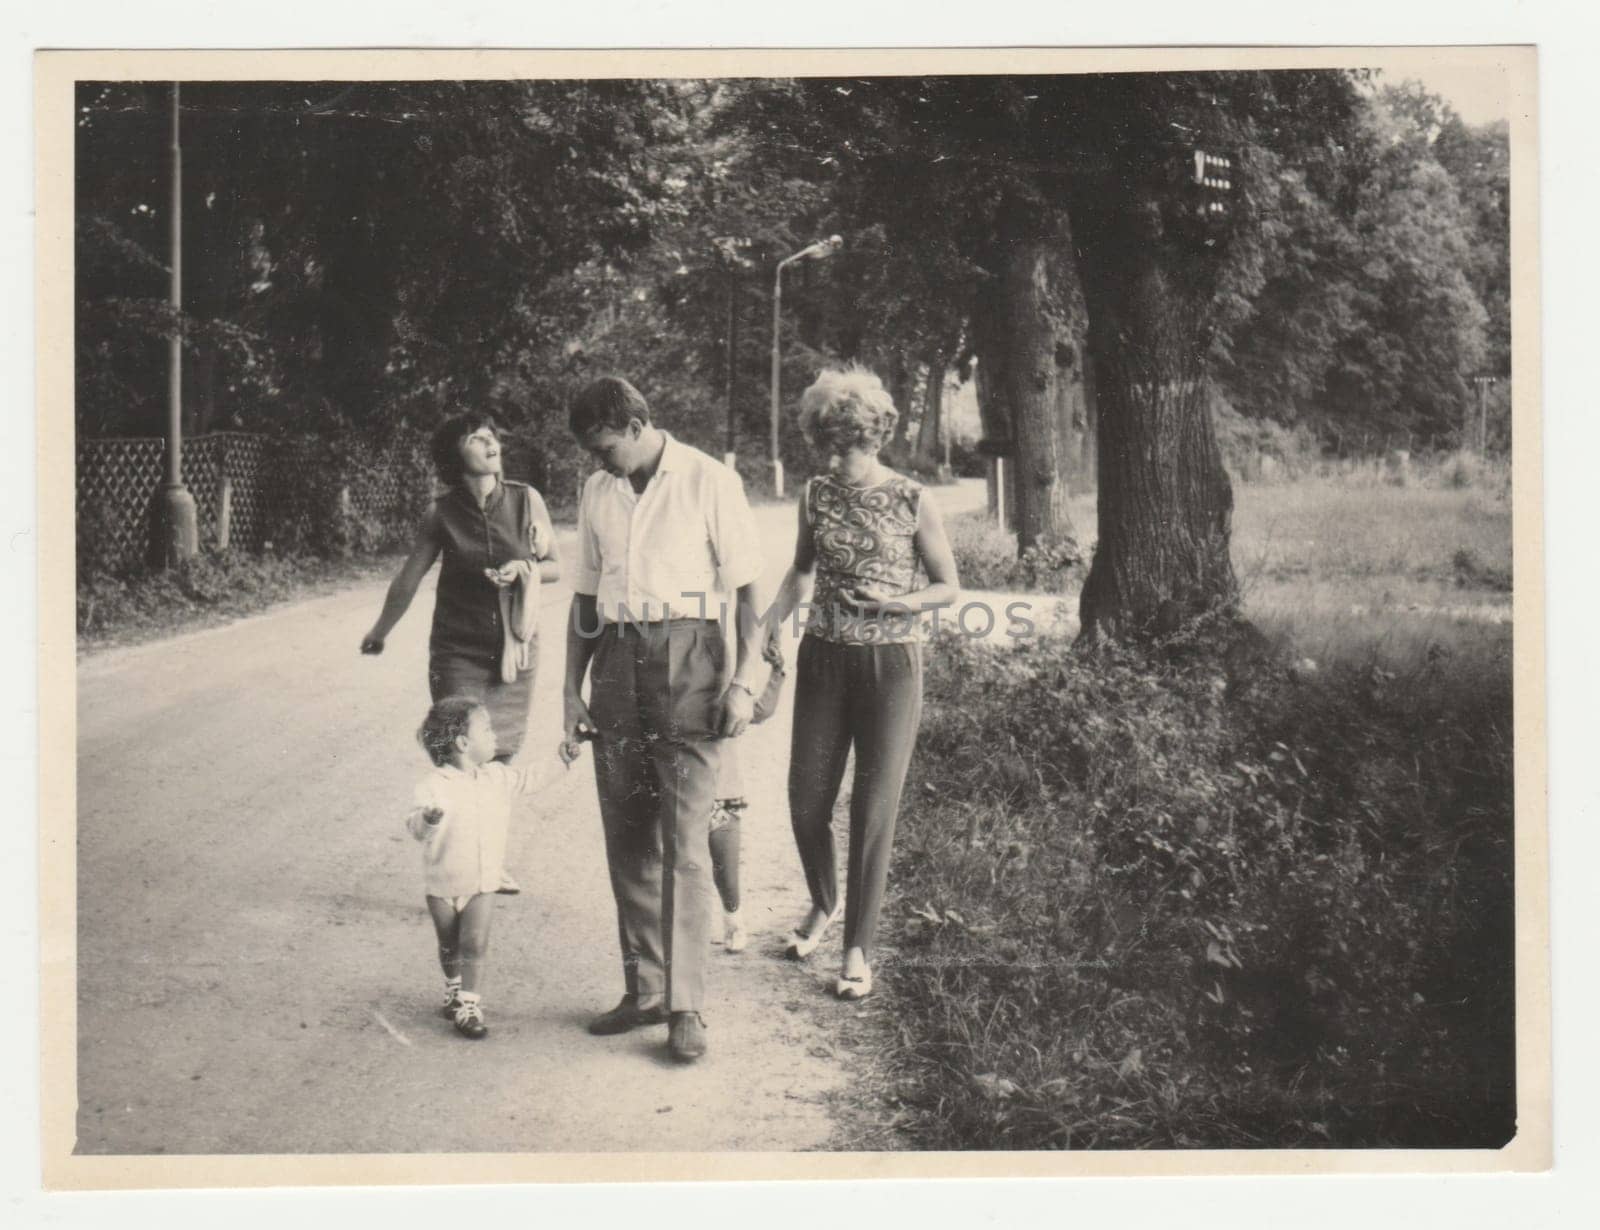 Vintage photo shows people go for a walk. Retro black and white photography. Circa 1980. by roman_nerud